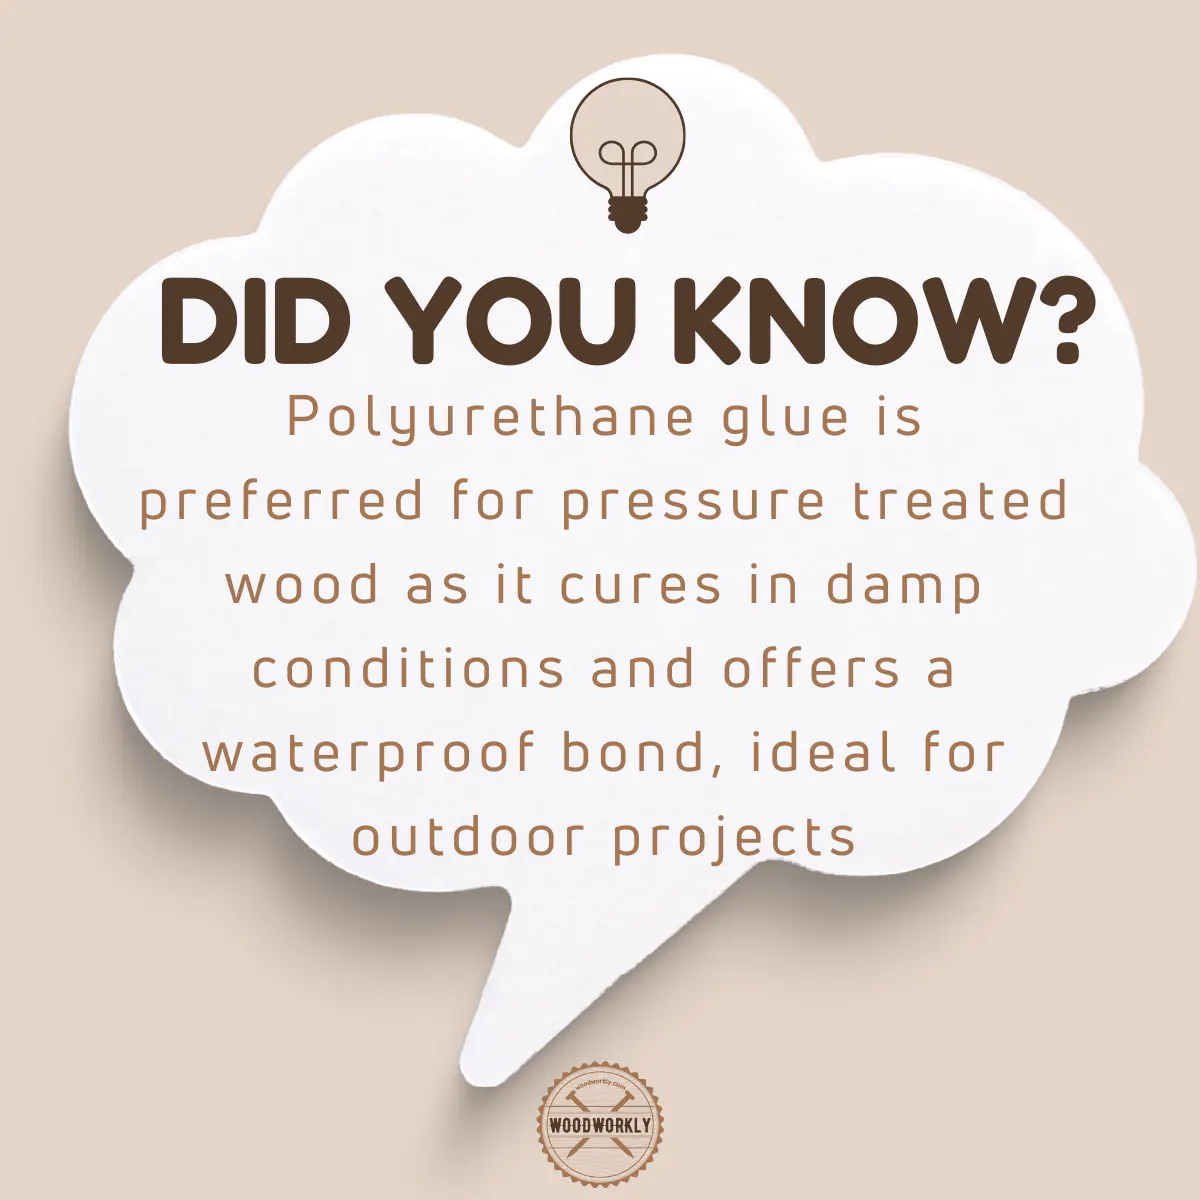 Did you know fact about gluing pressure treated wood